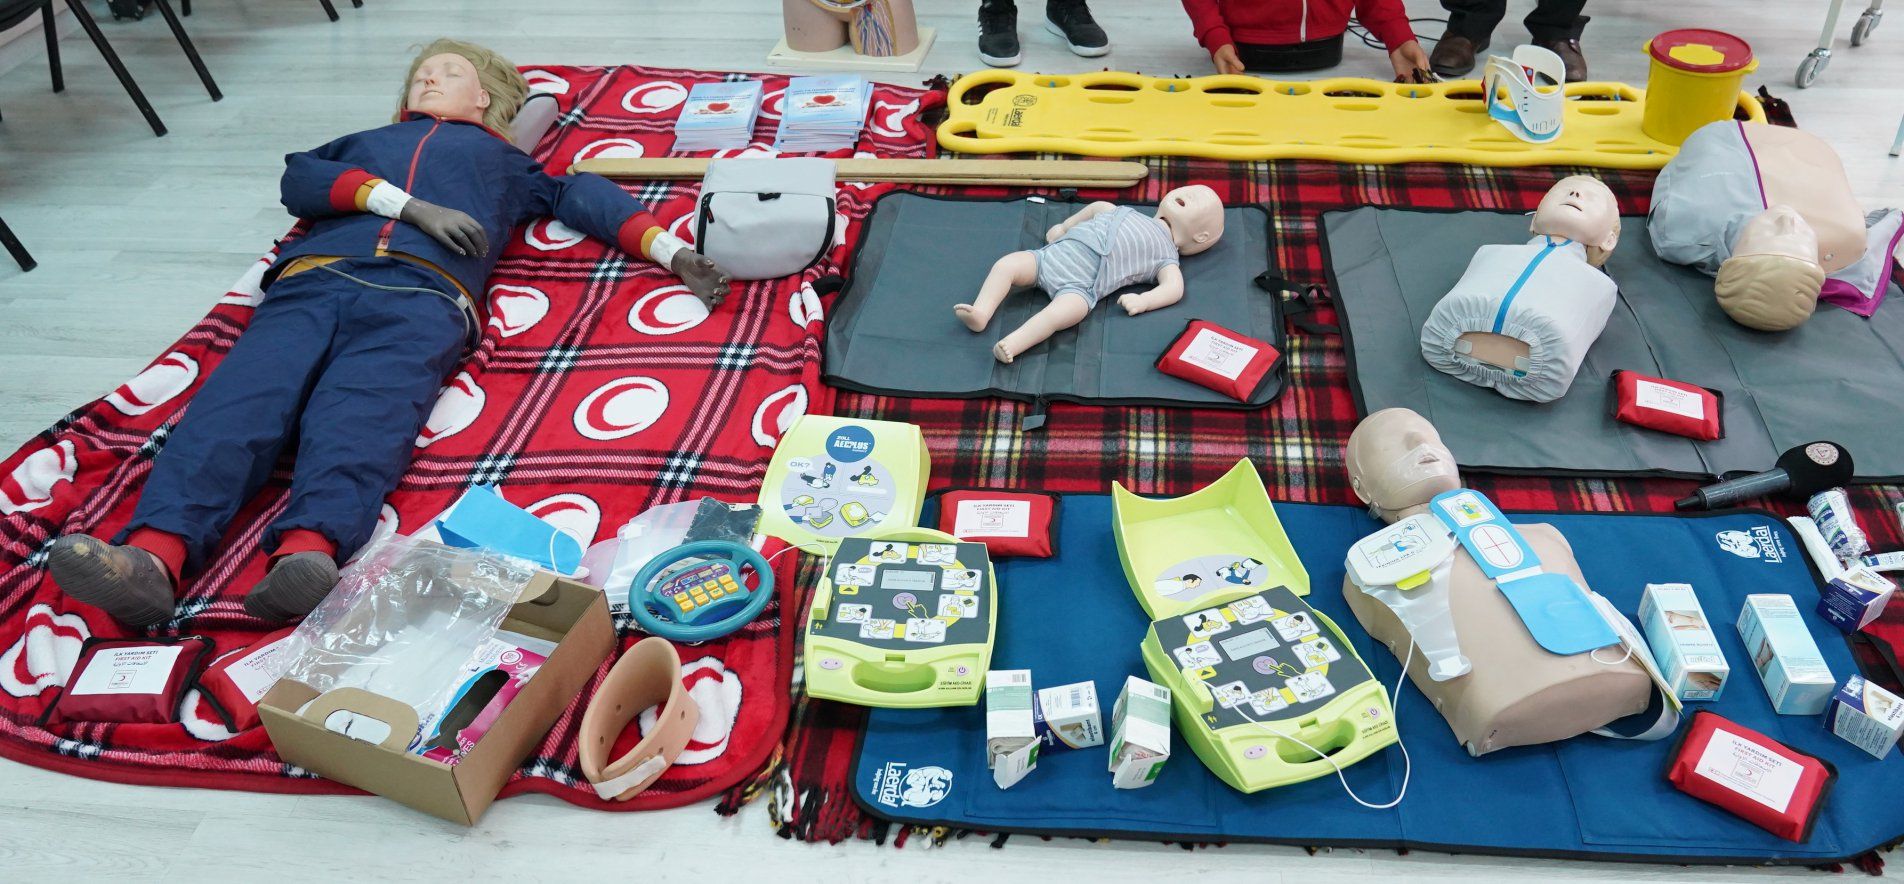 FIRST AID TRAINING PROGRAM FOR MORE THAN 35 THOUSAND TEACHERS IN VOCATIONAL EDUCATION